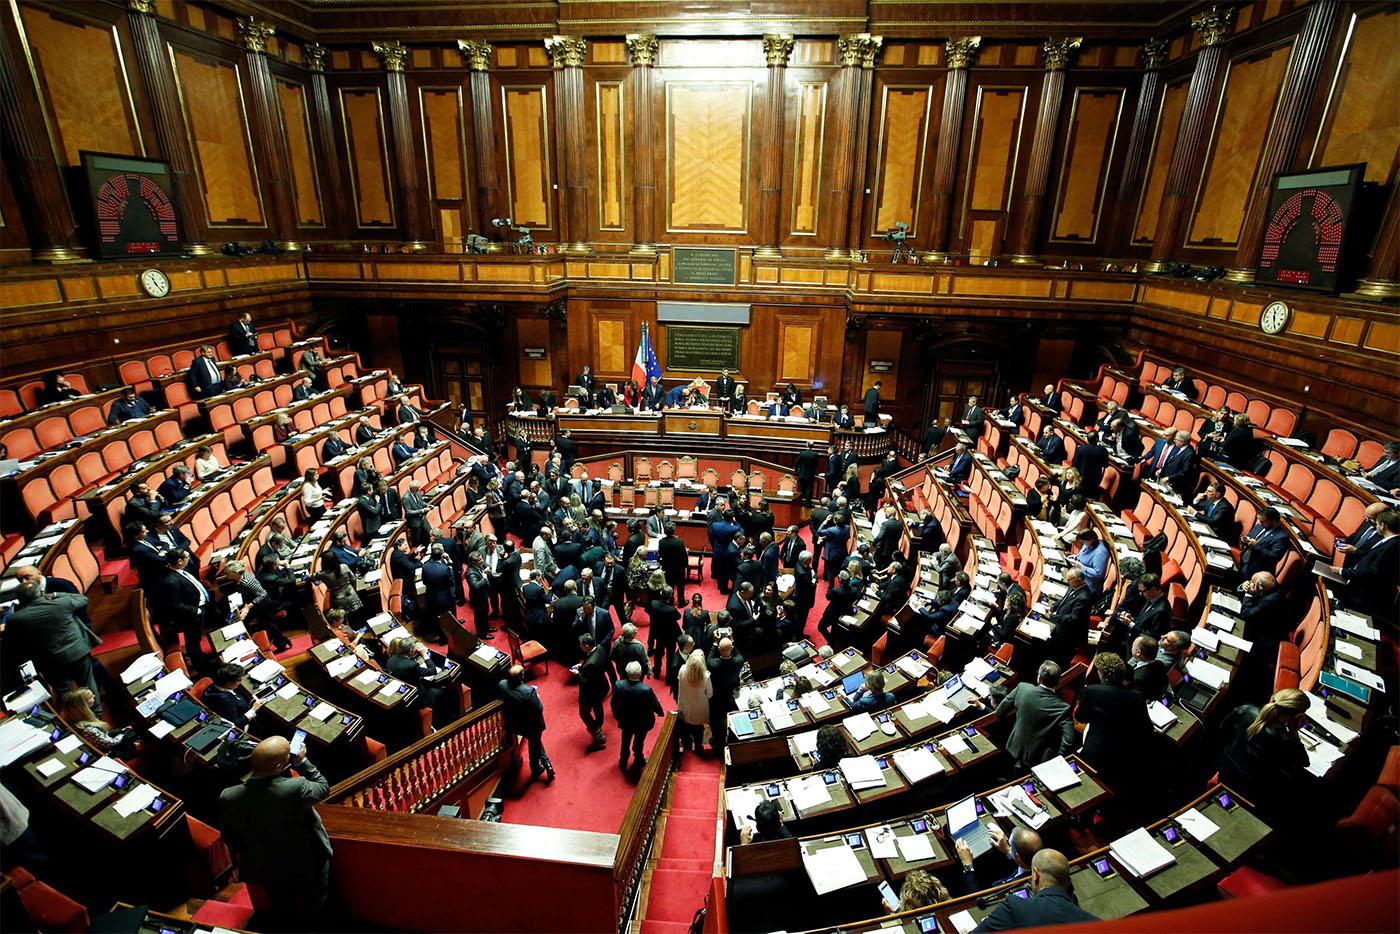 Italy's populist government won the confidence vote